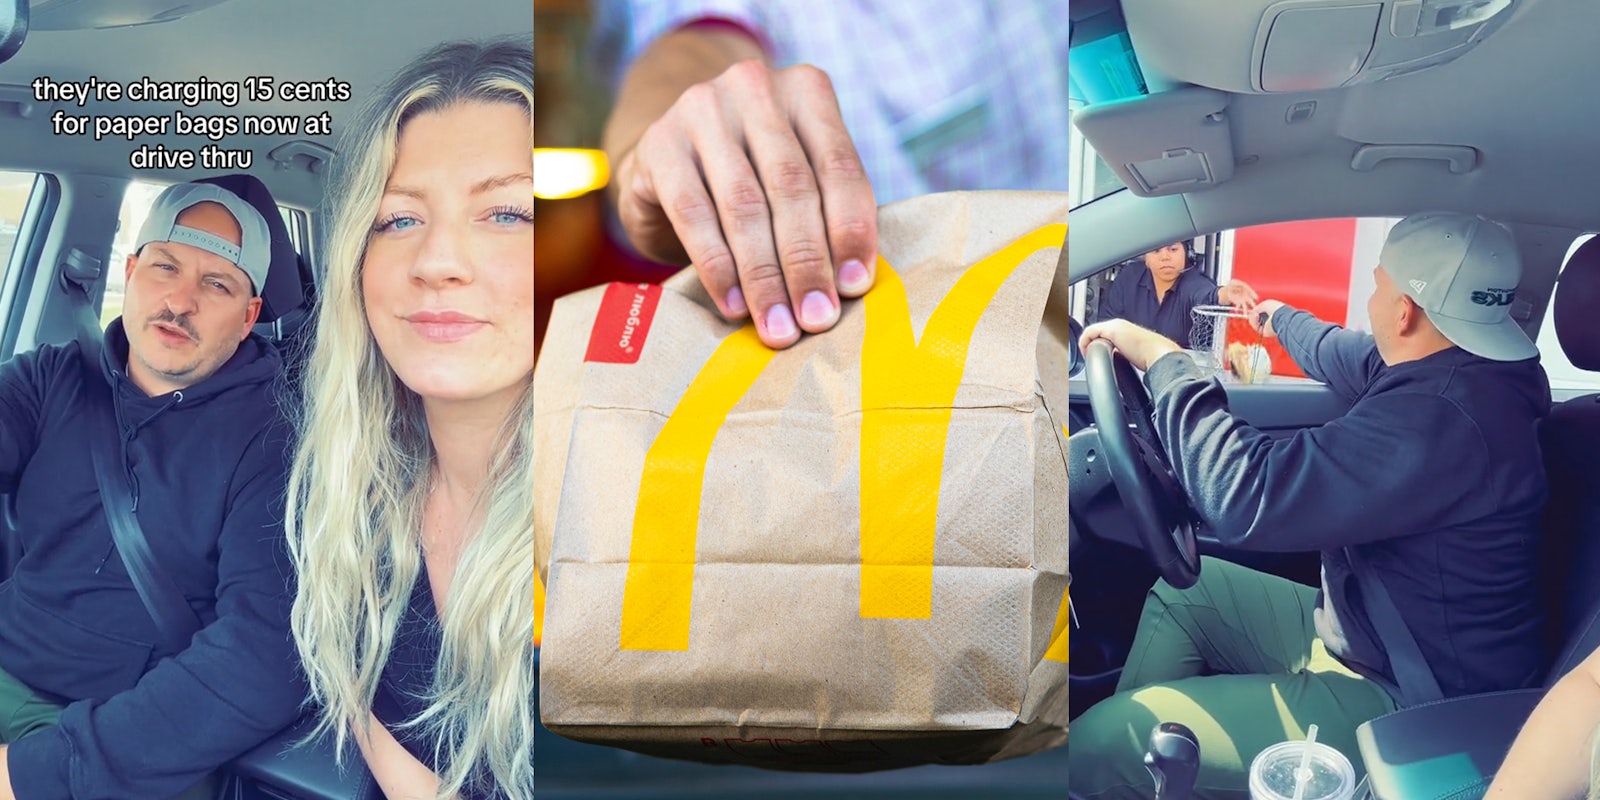 McDonald's customers in car with caption 'they're charging 15 cents for paper bags now at drive thru' (l) McDonald's worker holding branded paper bag (c) McDonald's customer receiving fillet-o-fish in fishing net at drive thru (r)